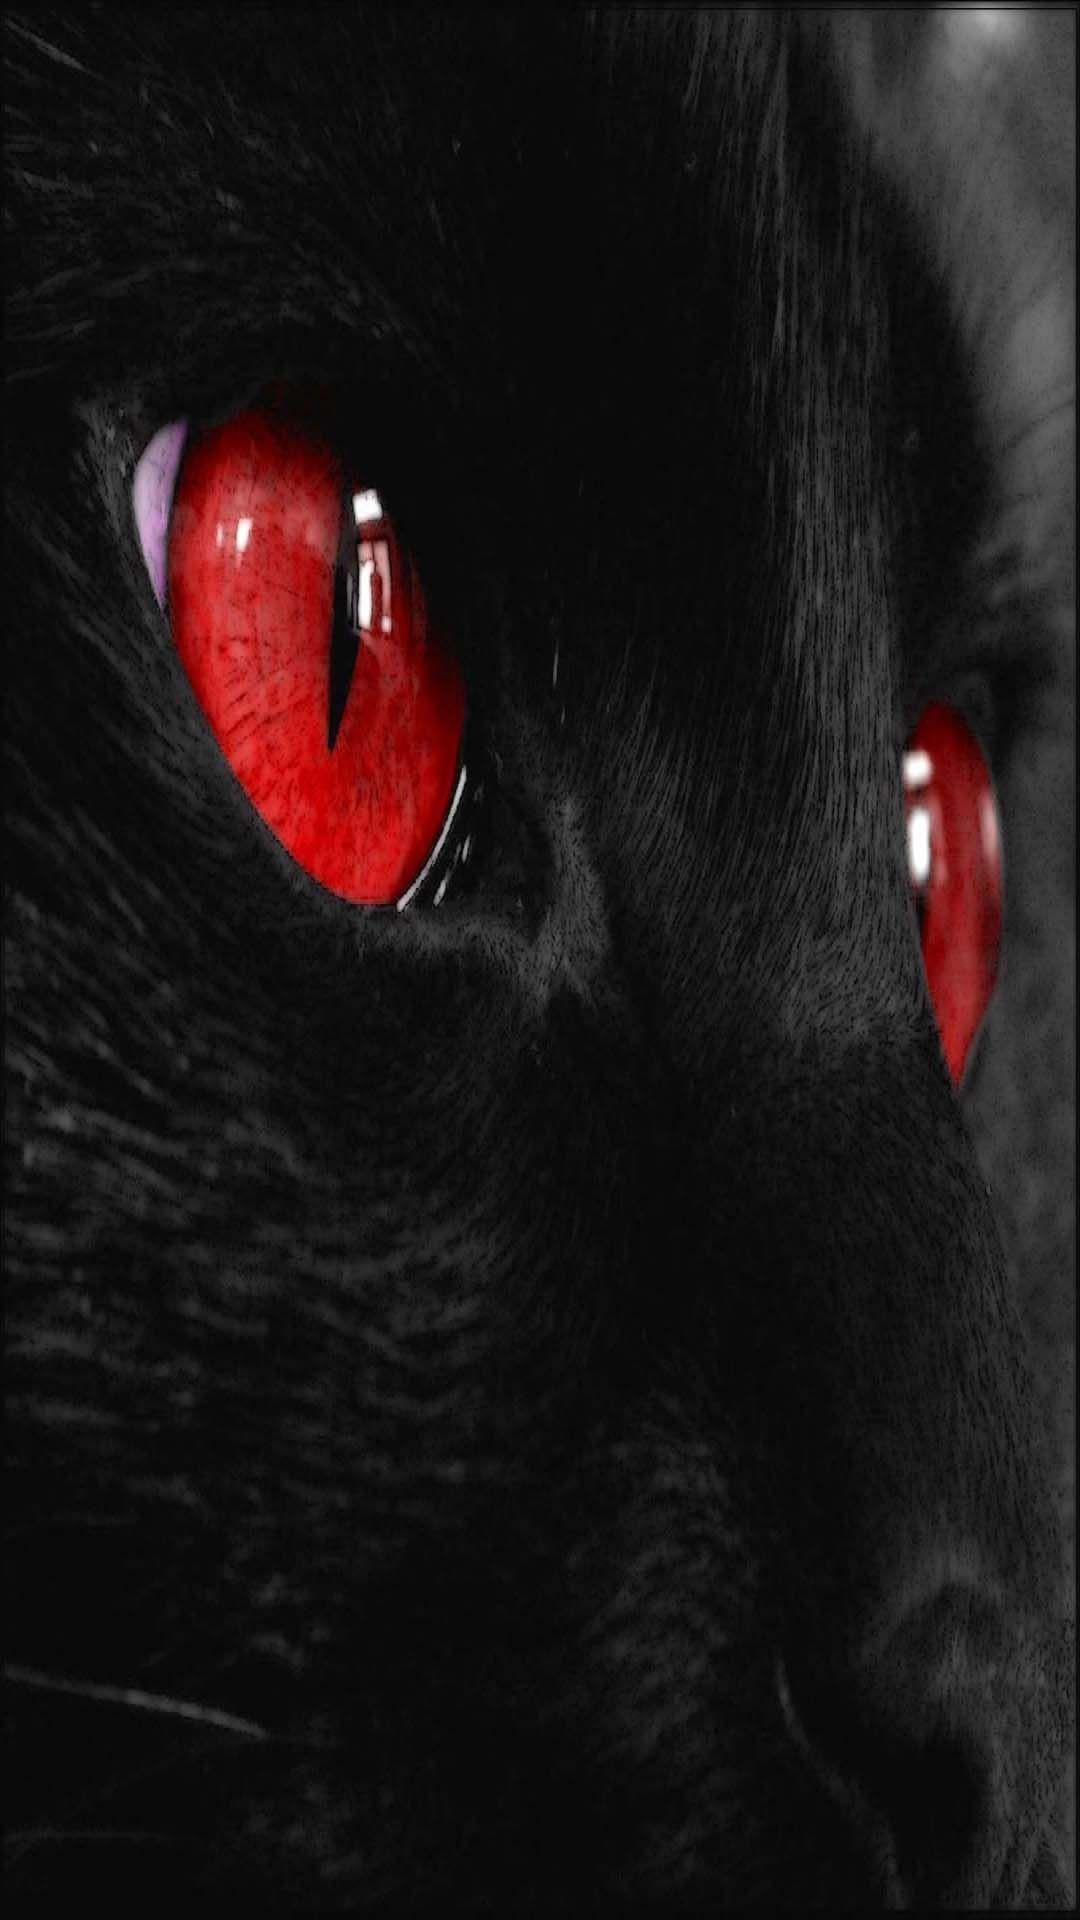 Wallpaper.wiki Black Cat With Red Eyes IPhone 5 Full Hd Wallpaper